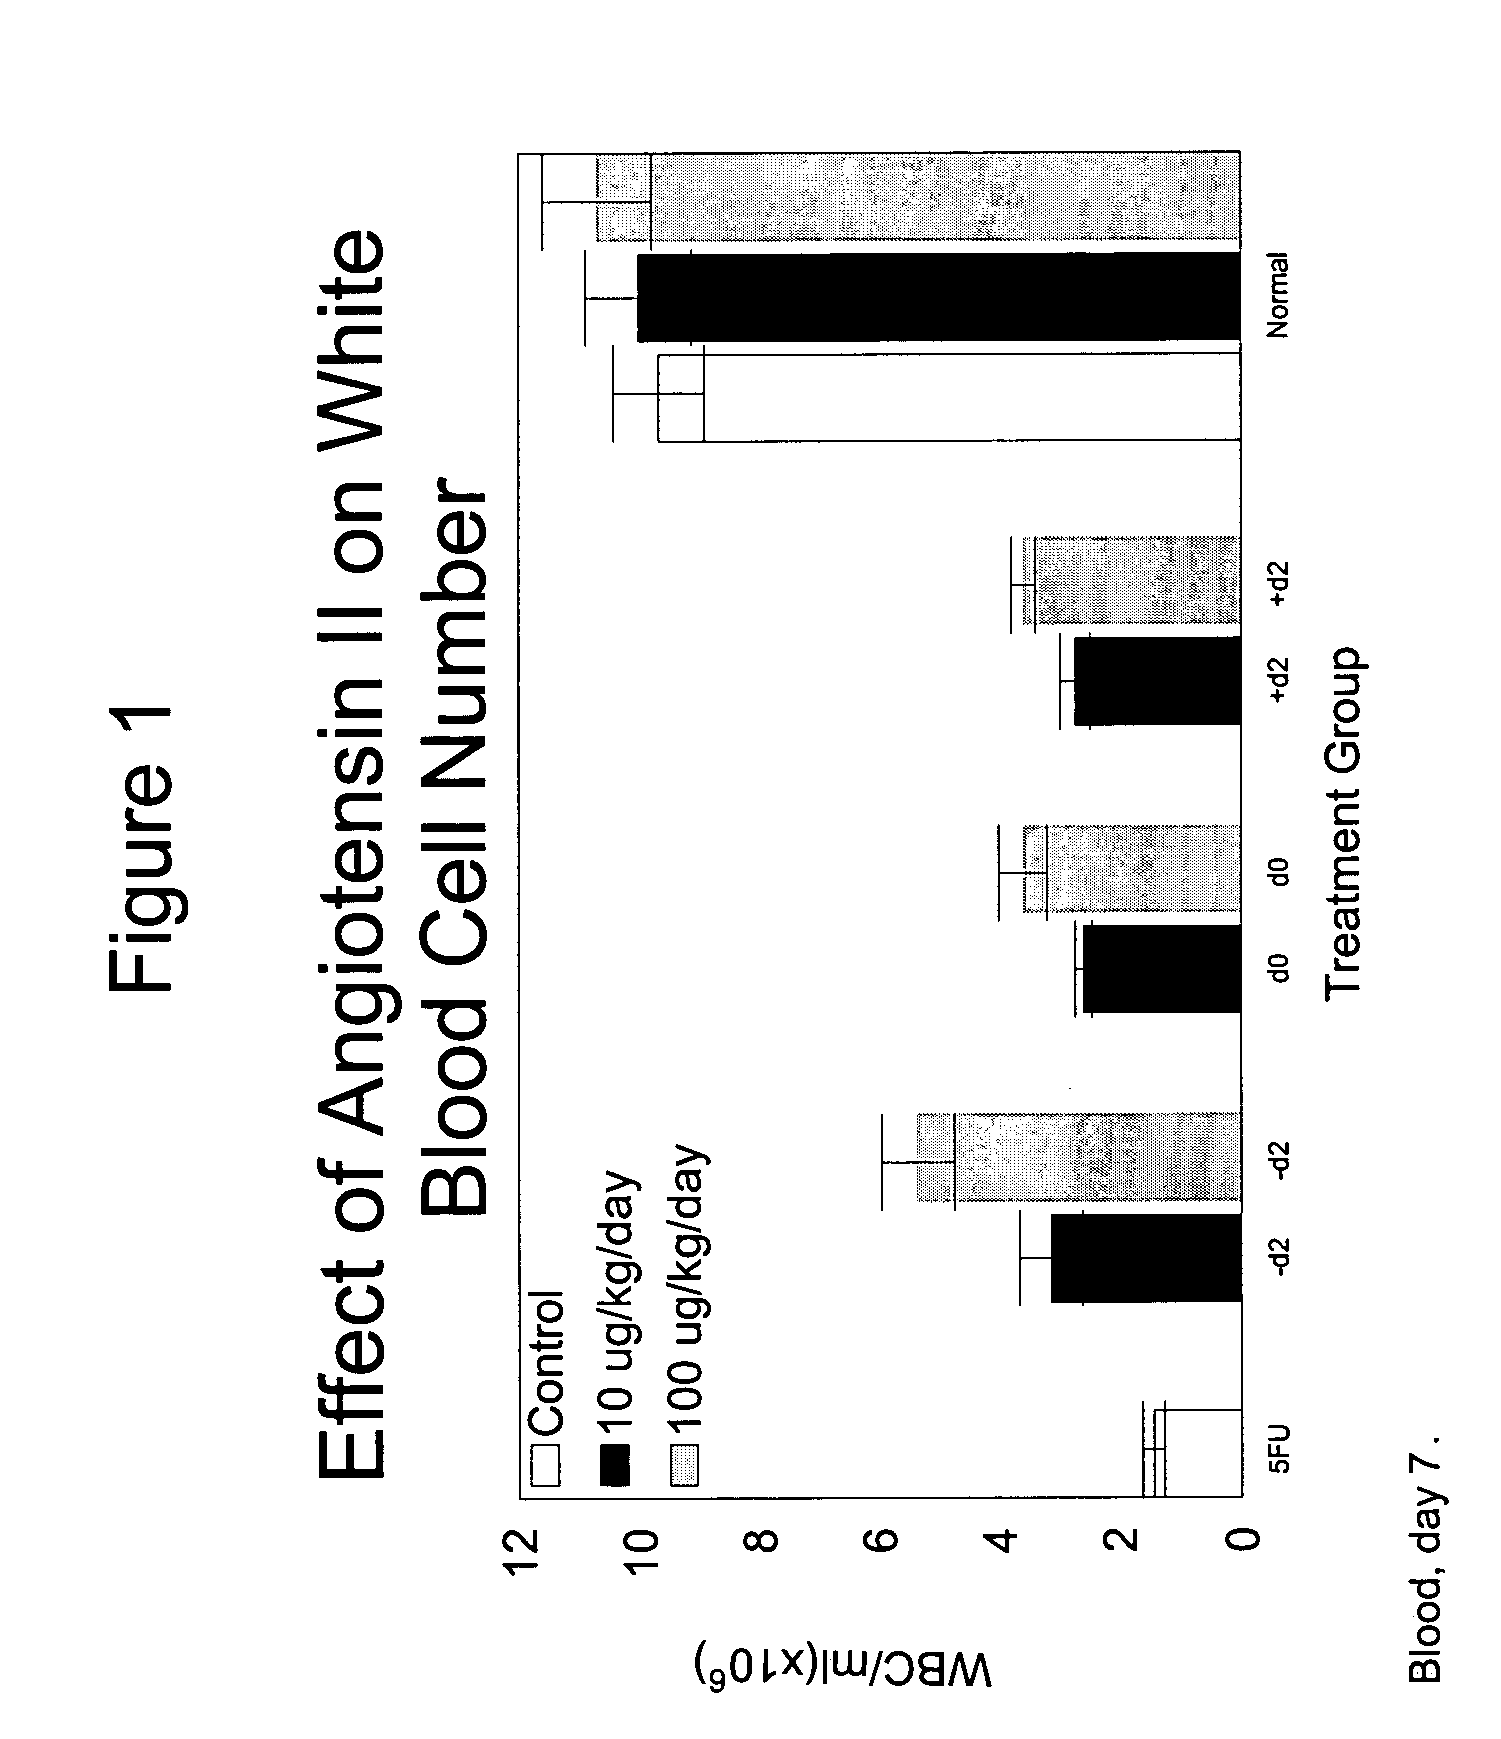 Methods for treating a patient undergoing chemotherapy